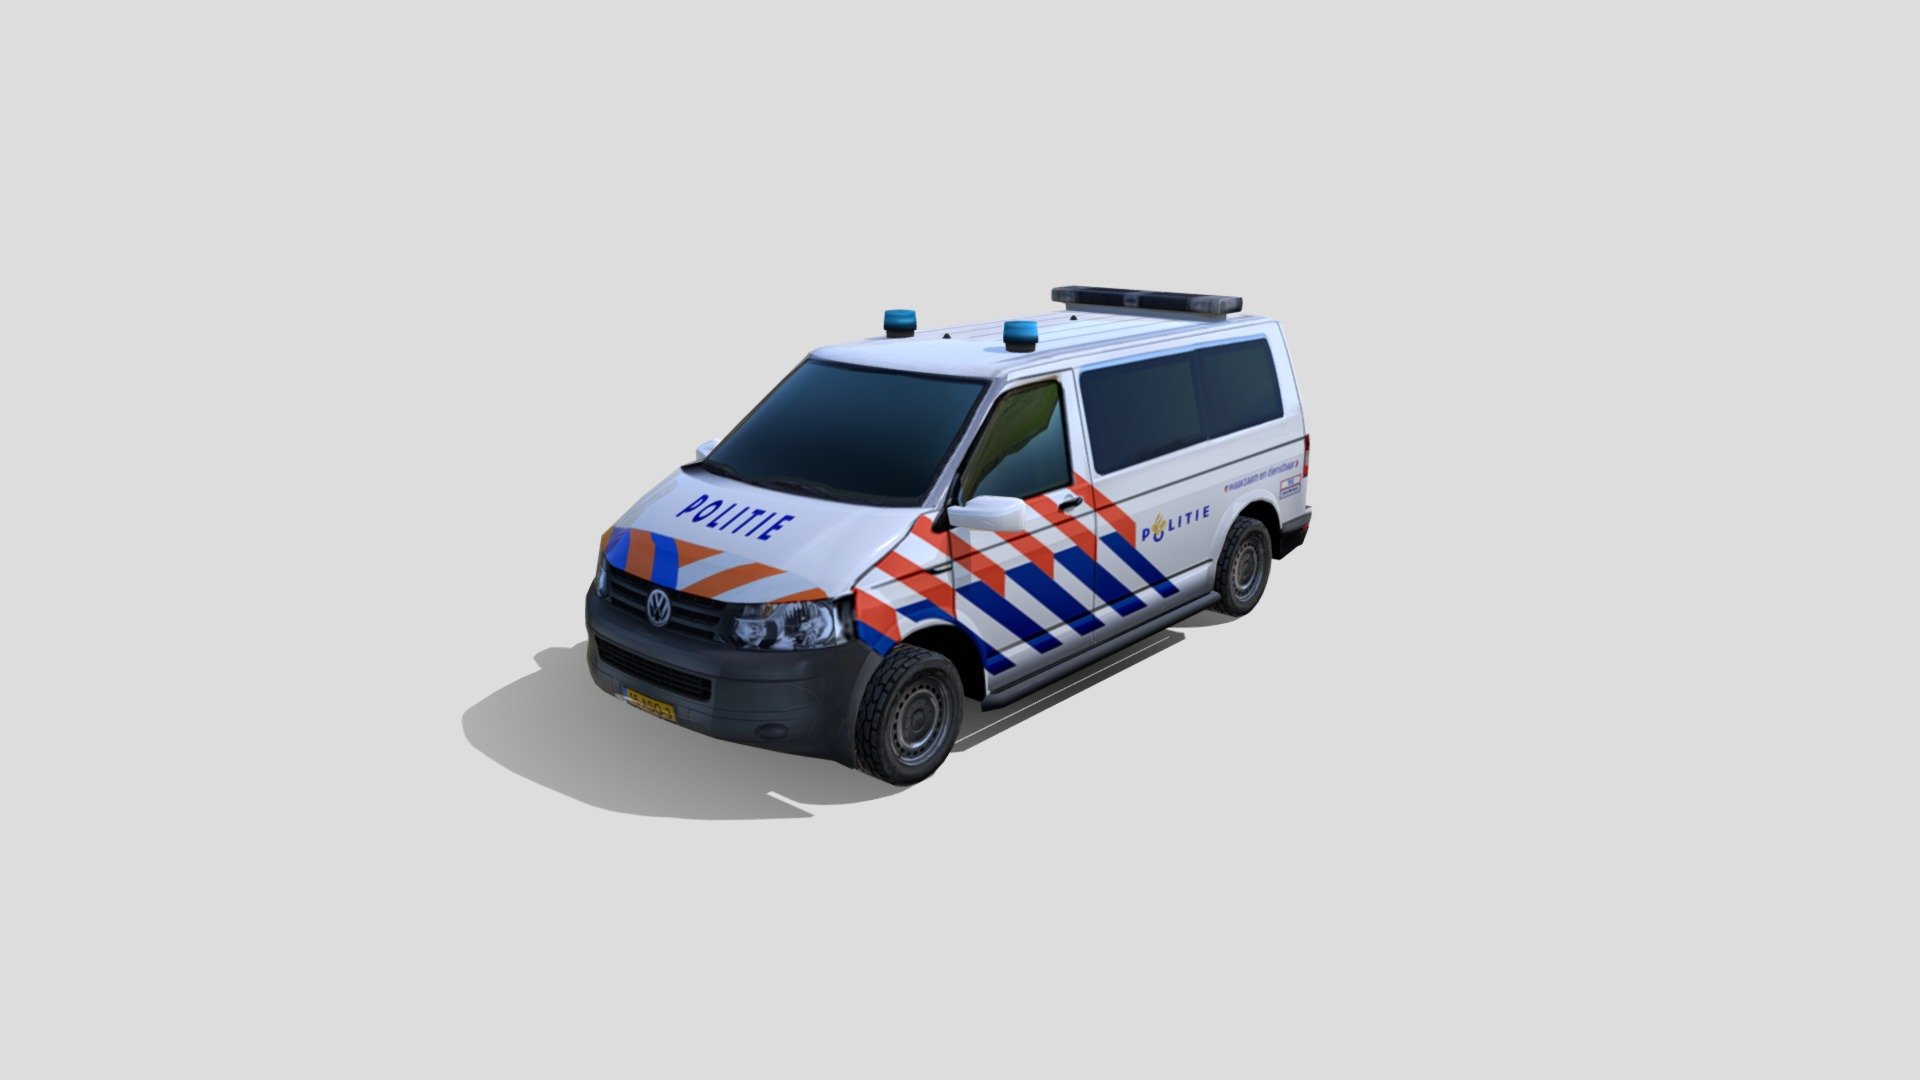 ASG-ISR

VW  Transporter (Dutch Police Livery)
Synthetic Environment Entity for use in Simulation and Training for Intelligence, Surveillance and Reconnaissance (ISR). 
Separate wheels can be controlled in game.

Police Livery (plain white texture also available)
Low poly model
Accuratly modelled off plan and using photo reference
1 LOD
1 UV texture map 1024
no animation
no materials

3492 triangles
http://www.asg-isr.com - VW  Transporter Dutch Police Livery Low Poly - 3D model by ASG-ISR 3d model